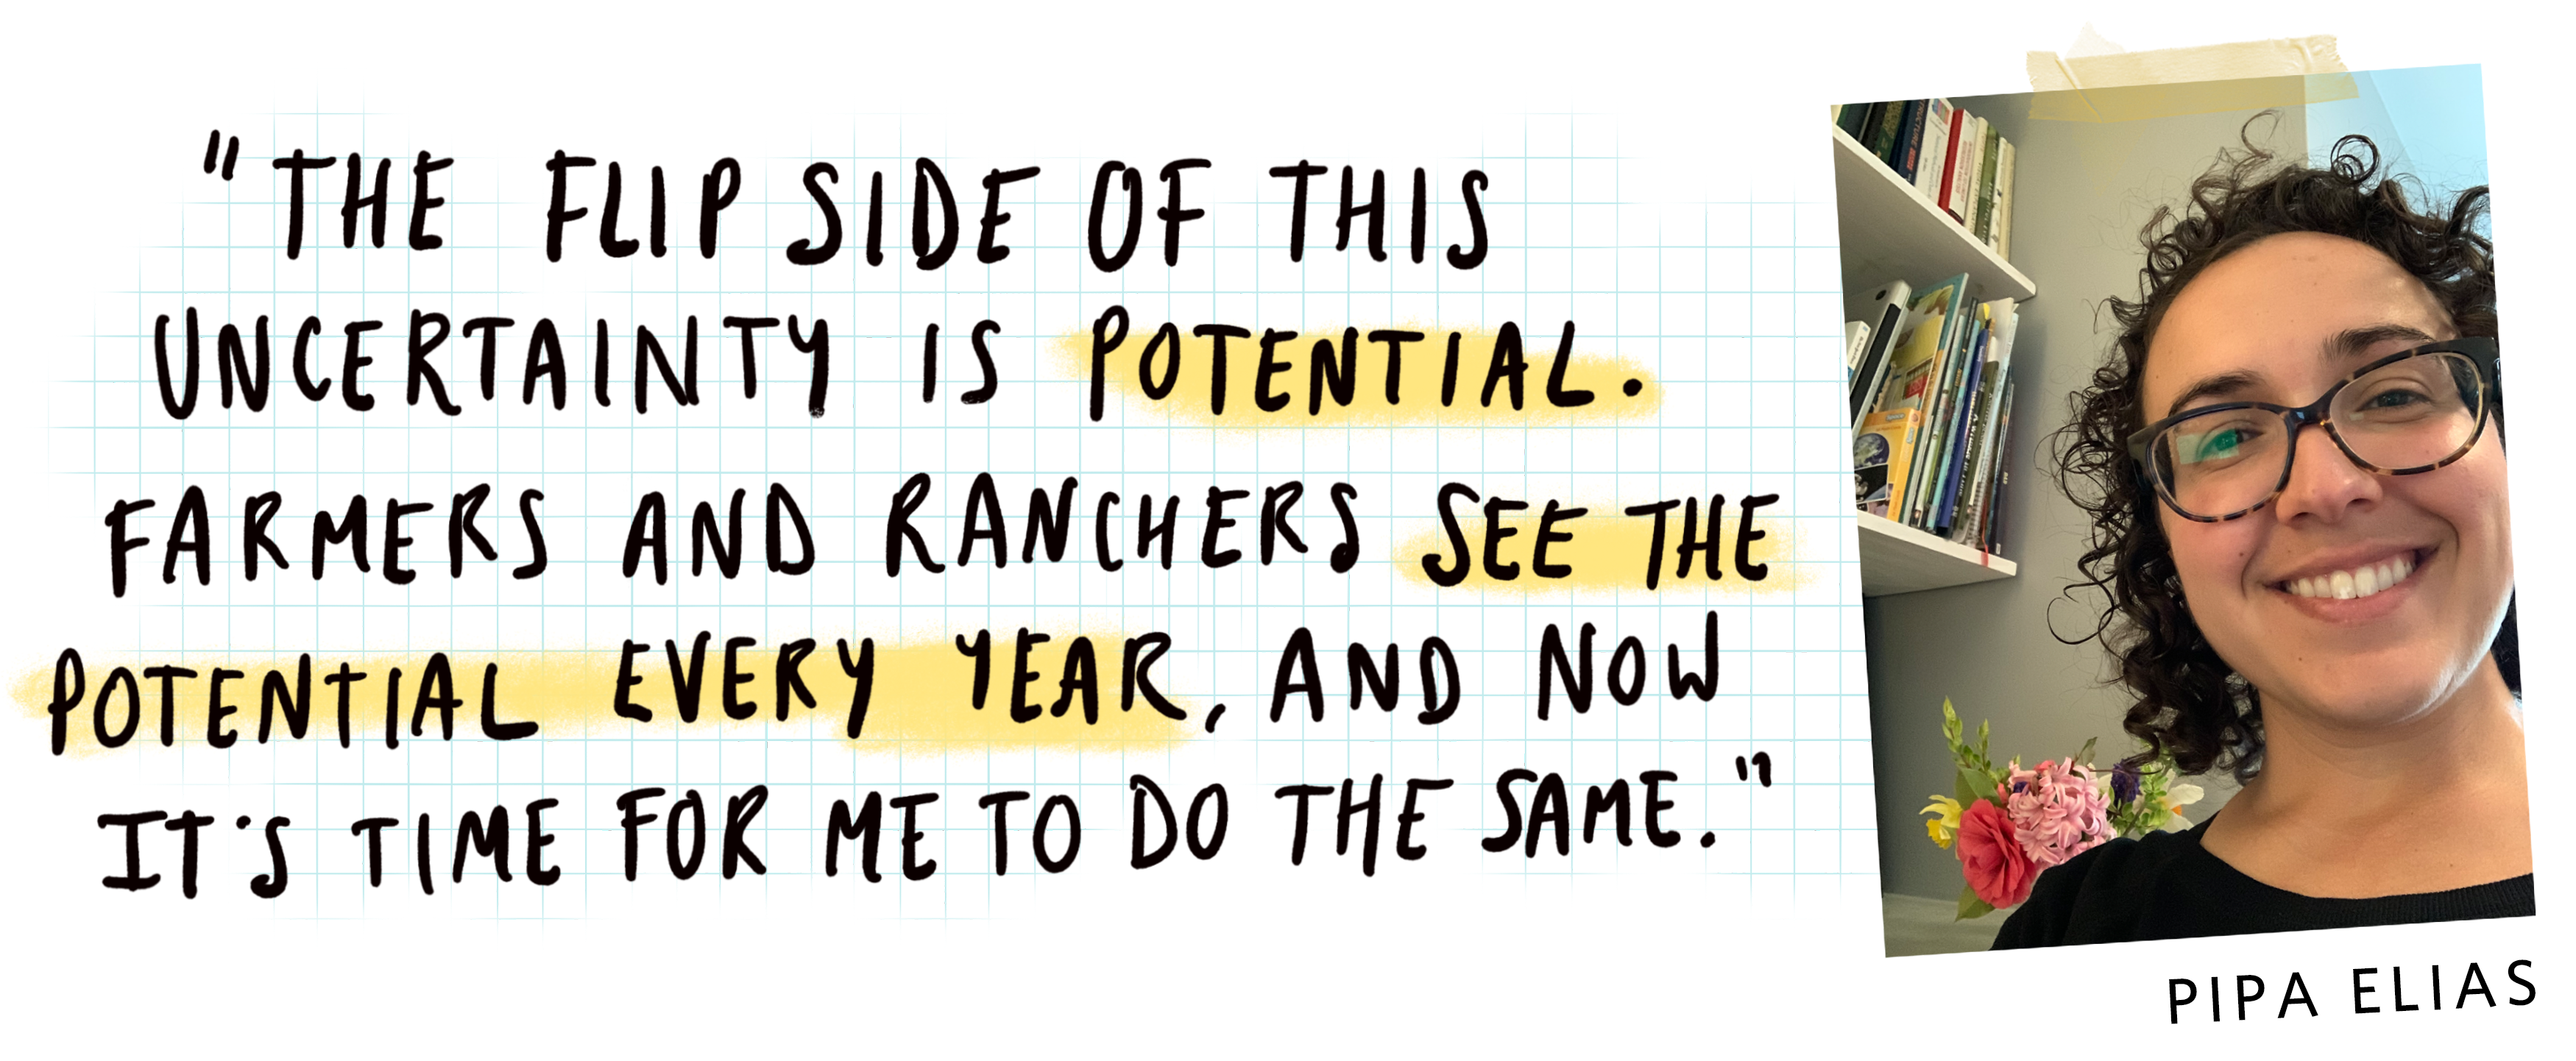 a handwritten quote that says 'the flip side of this uncertainty is potential. Farmers and ranchers see the potential every year, and now it's time for me to do the same,' with a close up portrait of a smiling woman to the right and the name Pipa Elias.